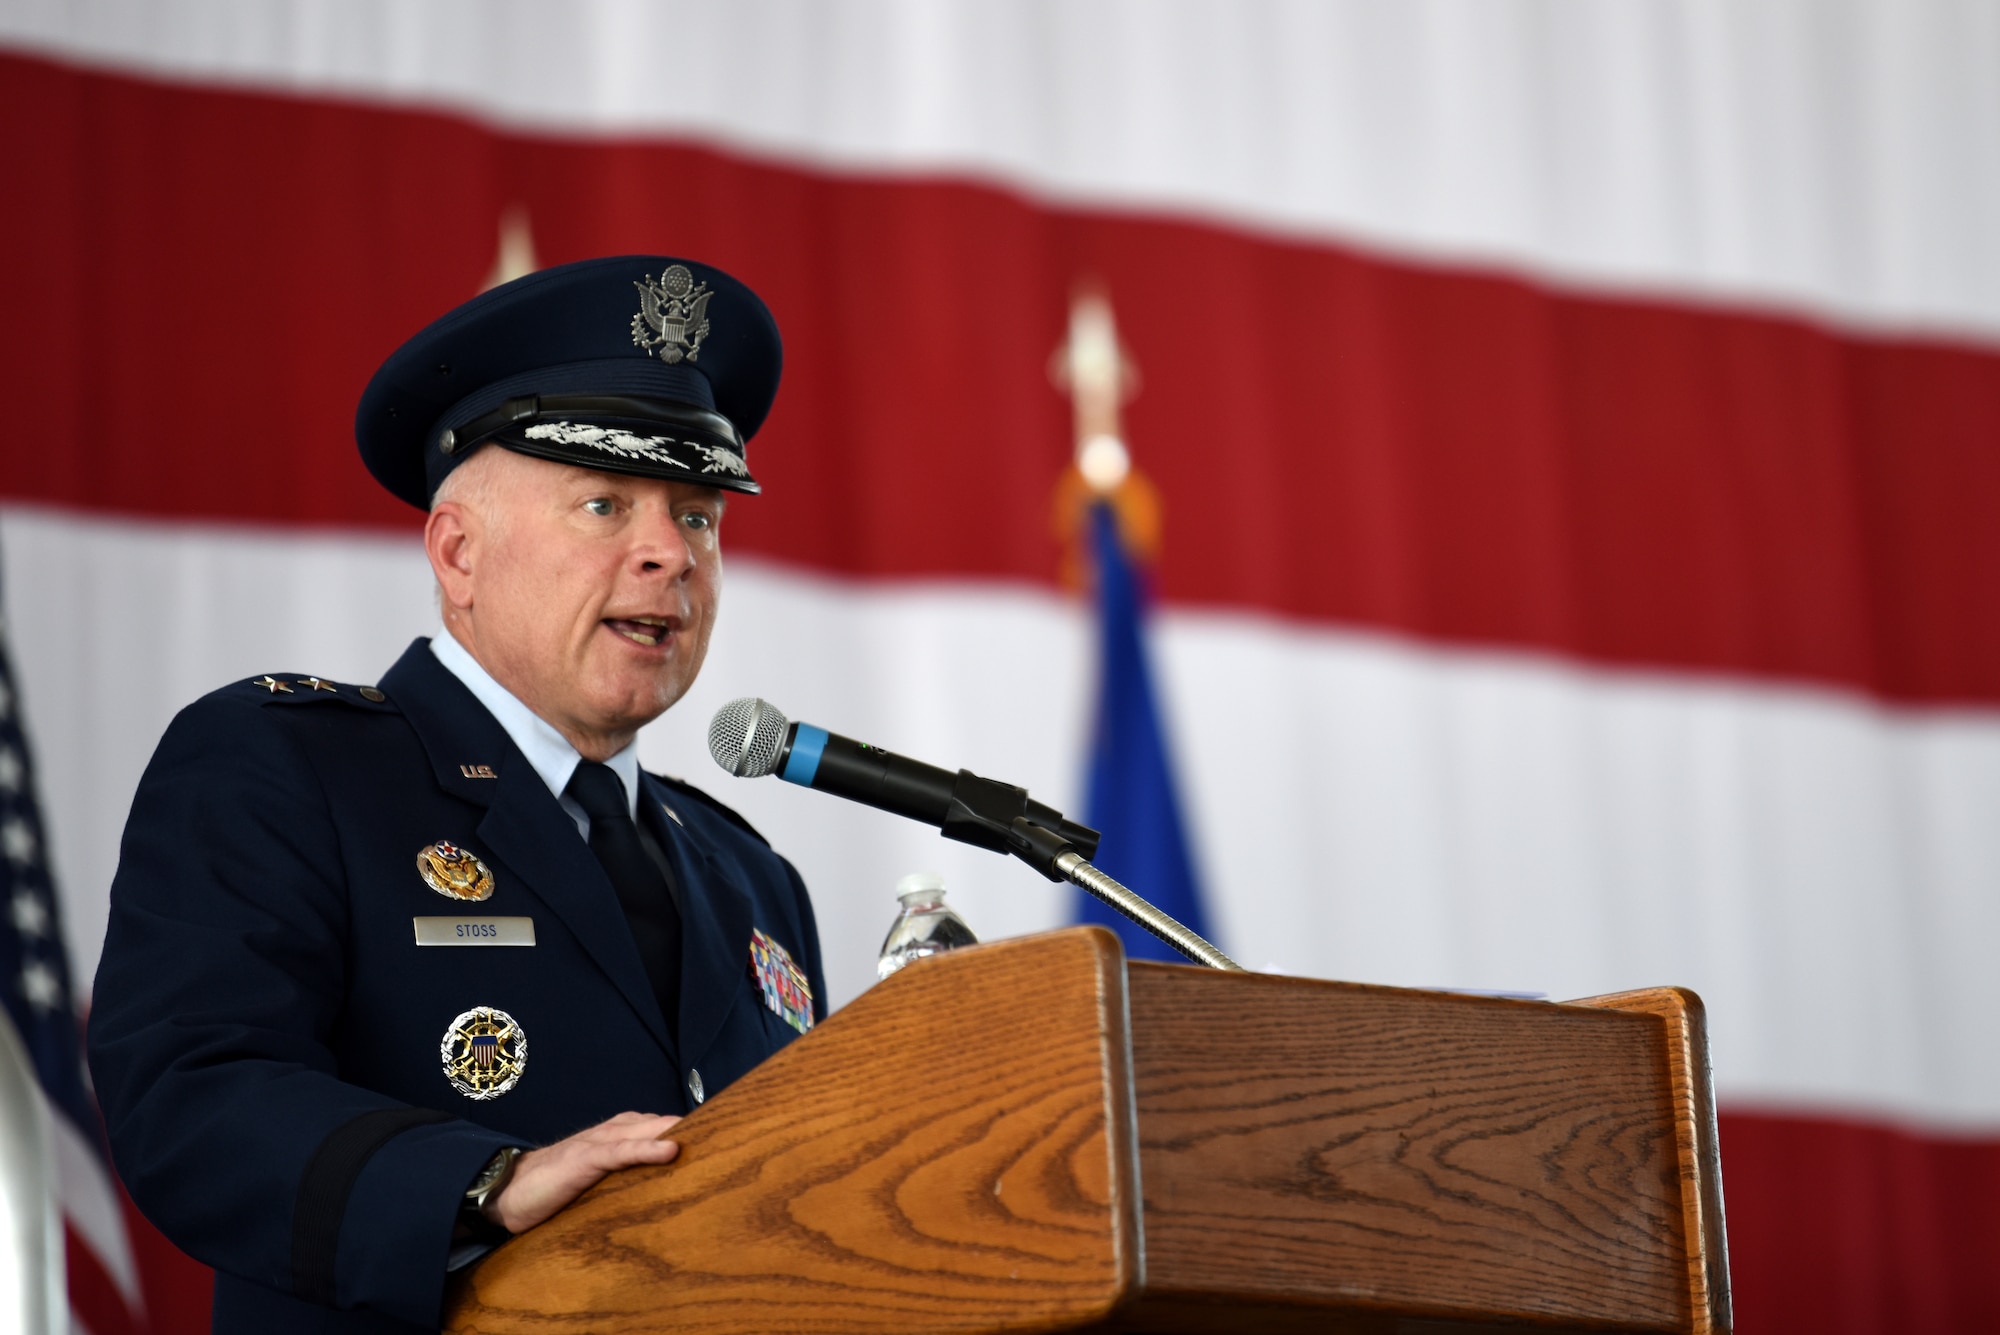 Maj. Gen. Ferdinand B. Stoss III, 20th Air Force commander, provides opening remarks during the 377th Air Base Wing Change of Command Ceremony at Kirtland Air Force Base, N.M., June 21, 2019. During the ceremony, command of the 377th ABW was transferred from Col. Richard Gibbs to Col. David Miller. (U.S Air Force photo by Senior Airman Eli Chevalier)